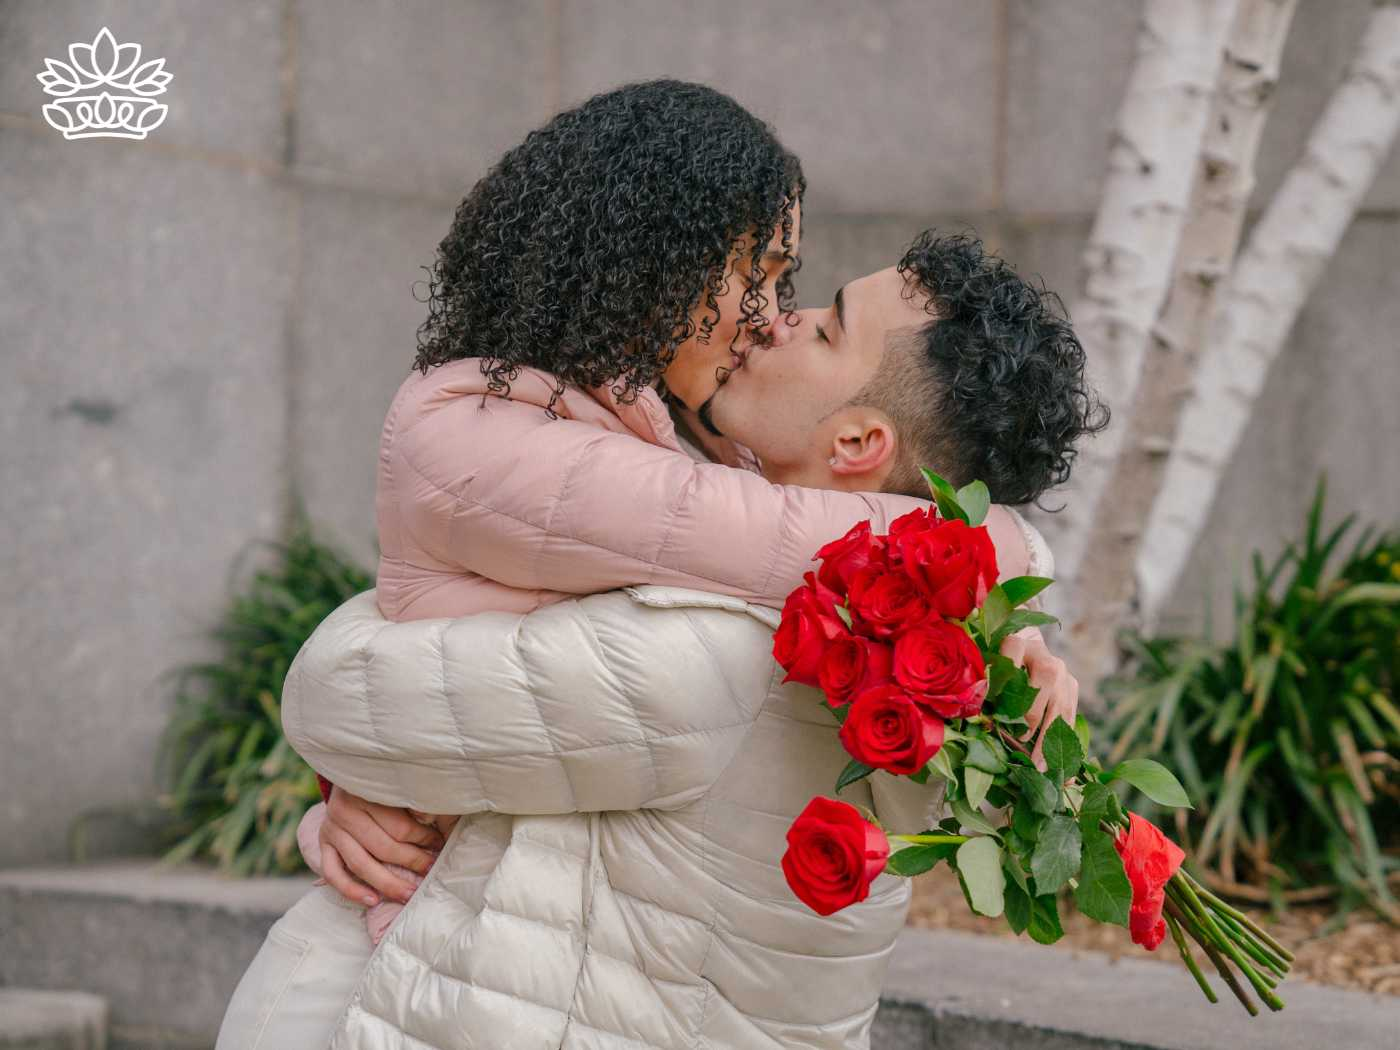 A couple embracing and kissing outdoors while holding a bouquet of red roses, from the Gifts Under R500 Collection at Fabulous Flowers and Gifts, including keywords such as simple, women, advertisement, notebook, chat, and skin.